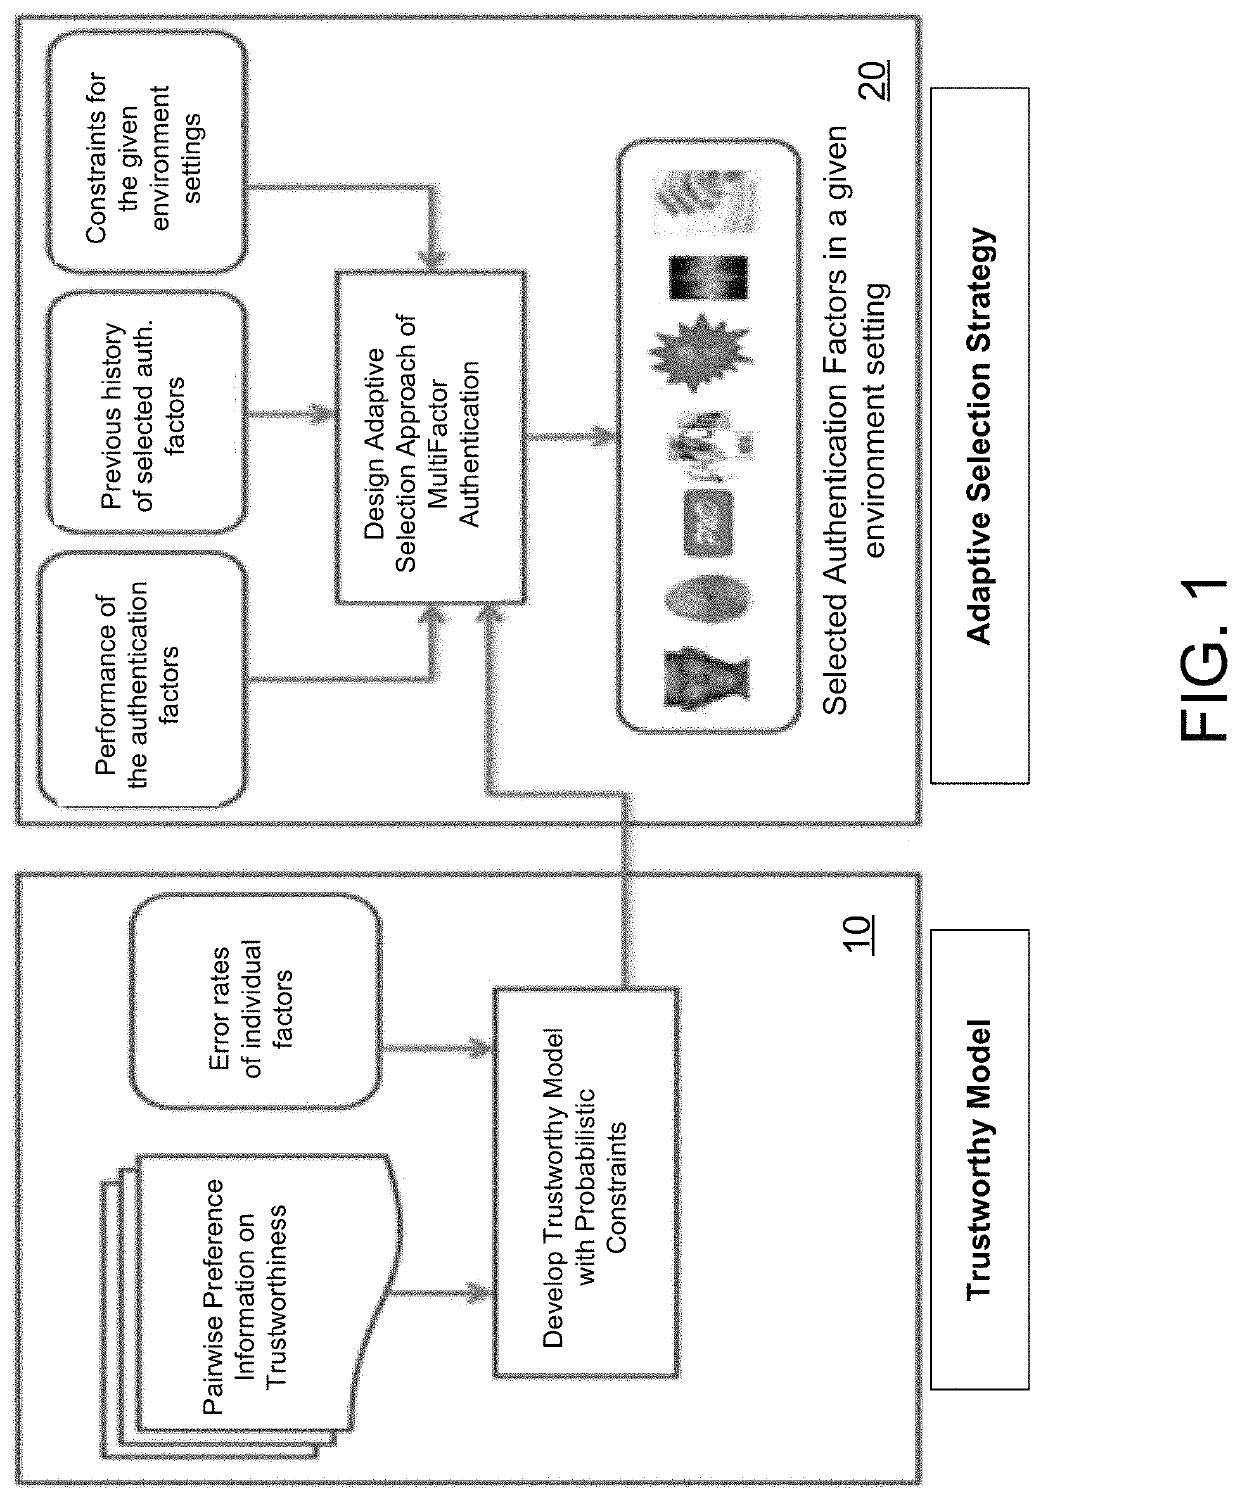 Adaptive multi-factor authentication system with multi-user permission strategy to access sensitive information